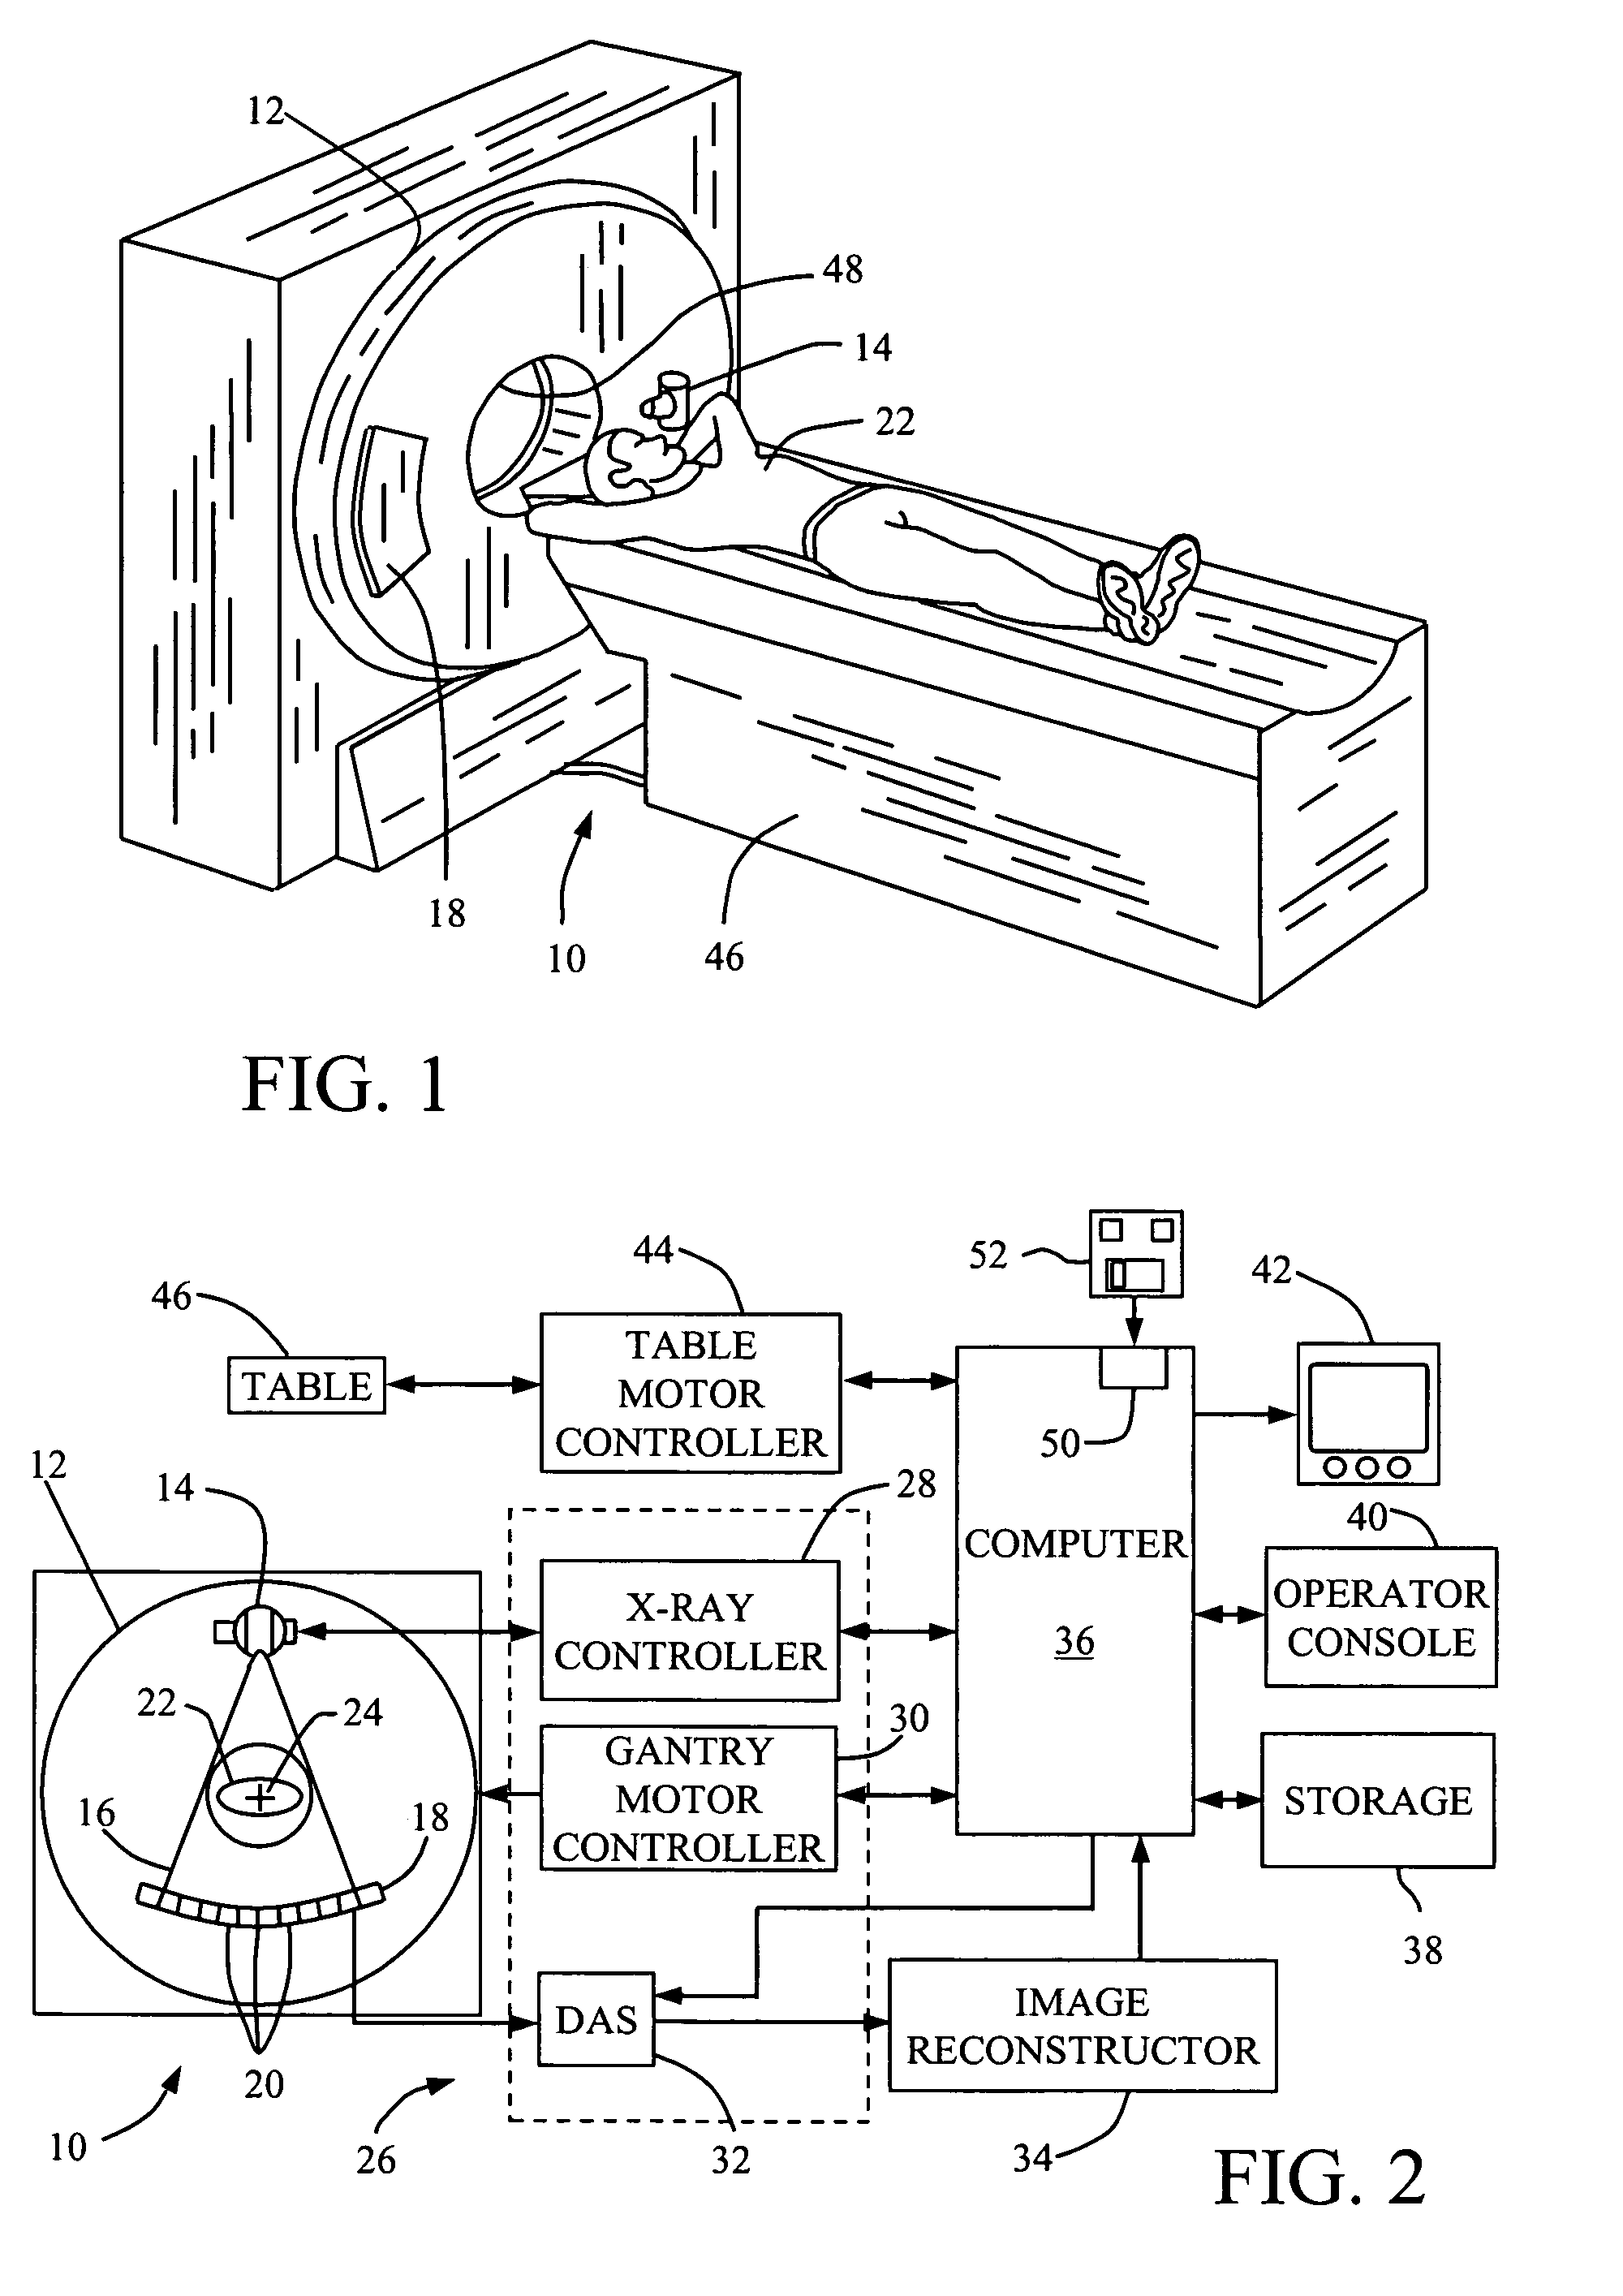 Methods and apparatus for anomaly detection